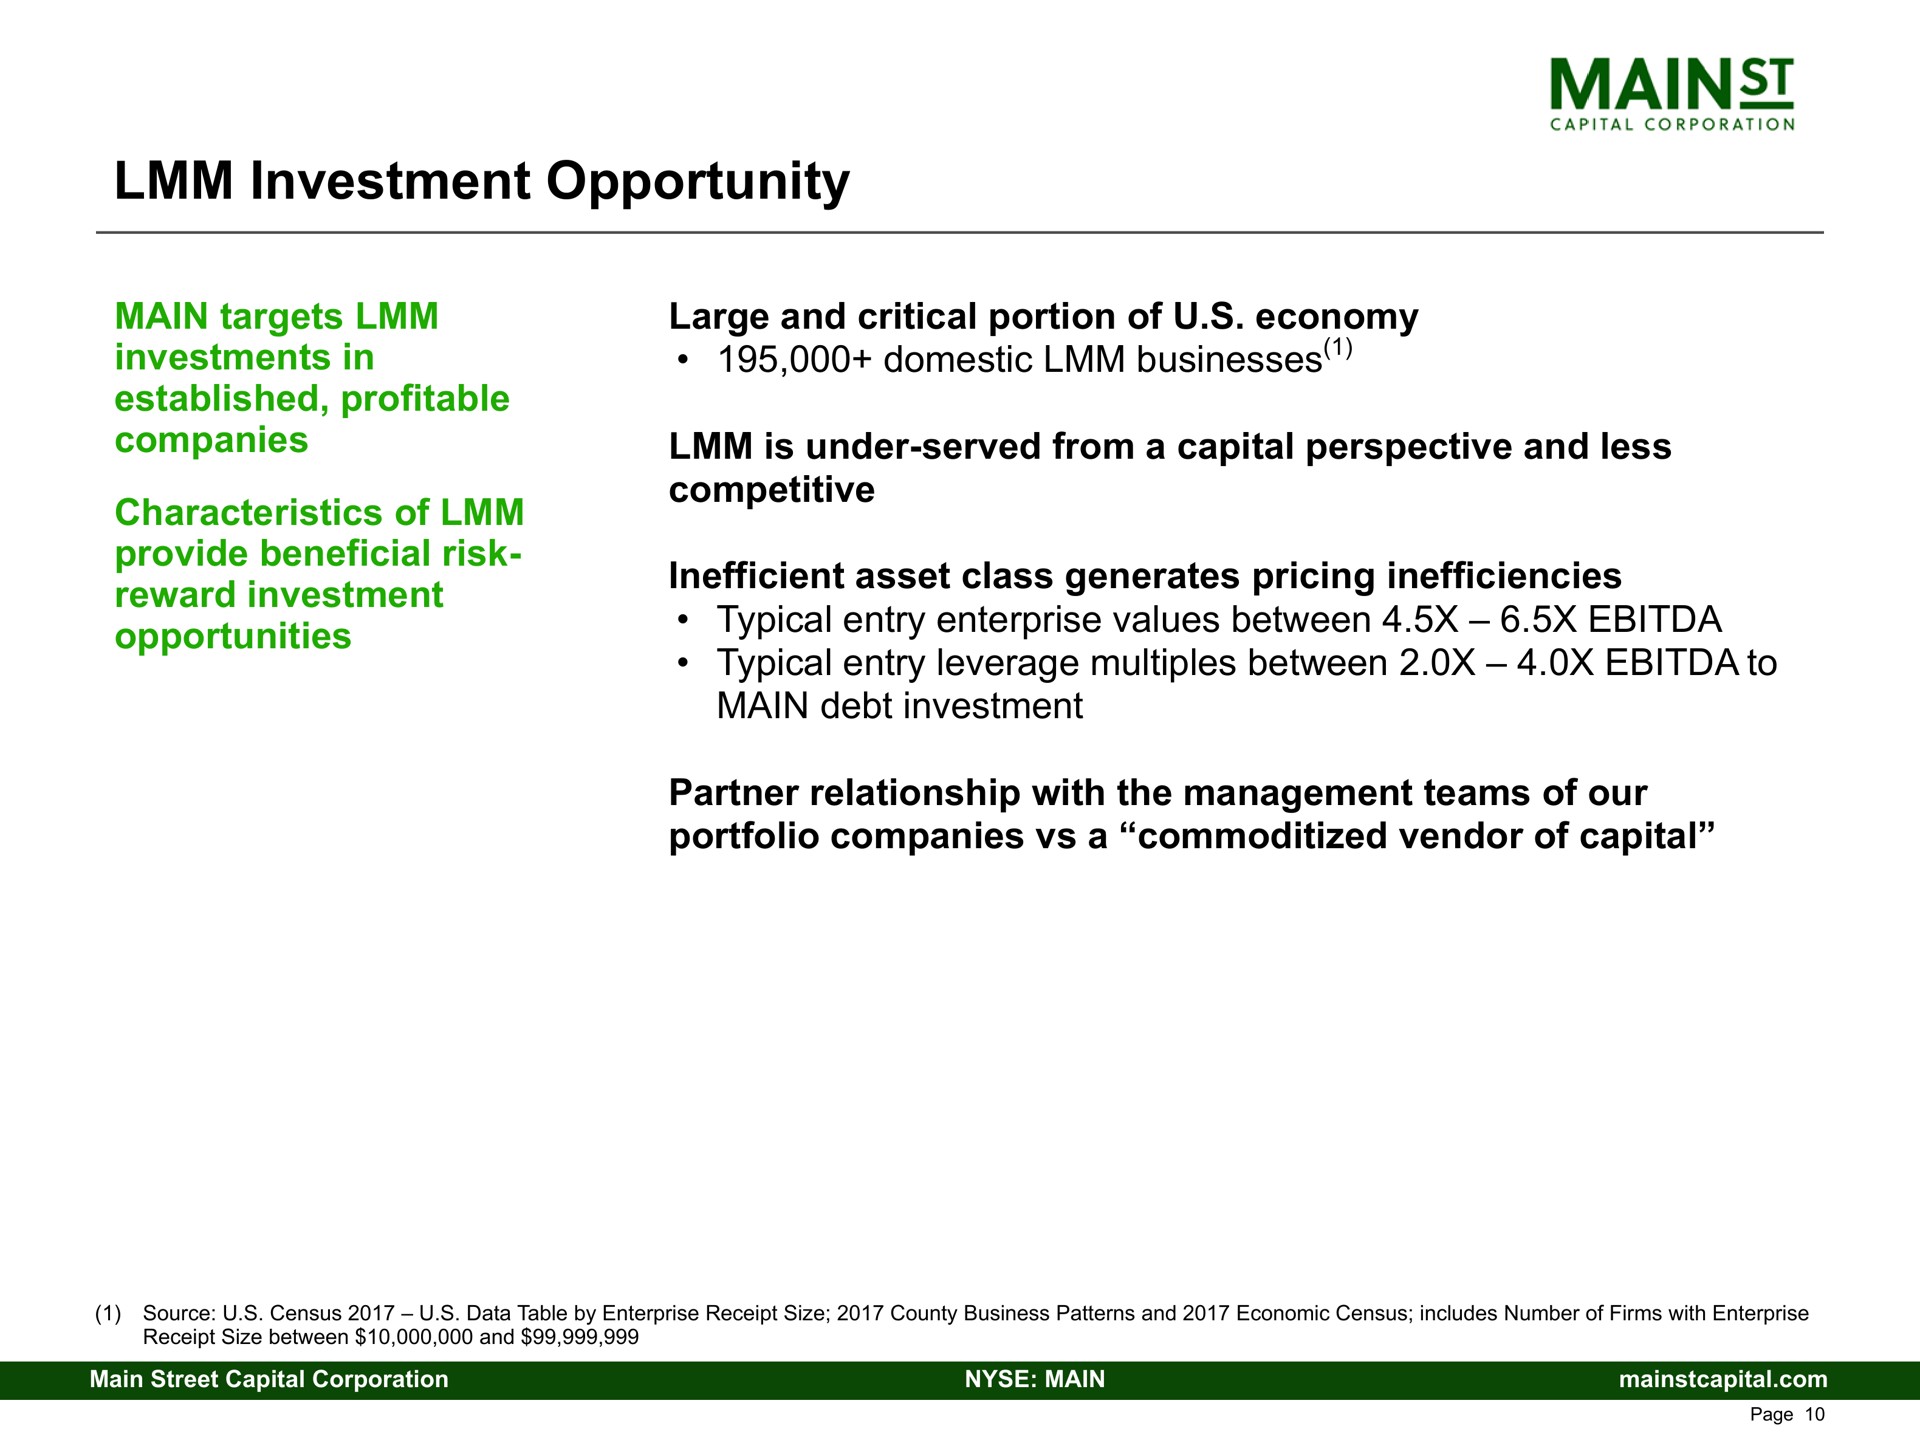 investment opportunity investments in characteristics of domestic businesses competitive | Main Street Capital